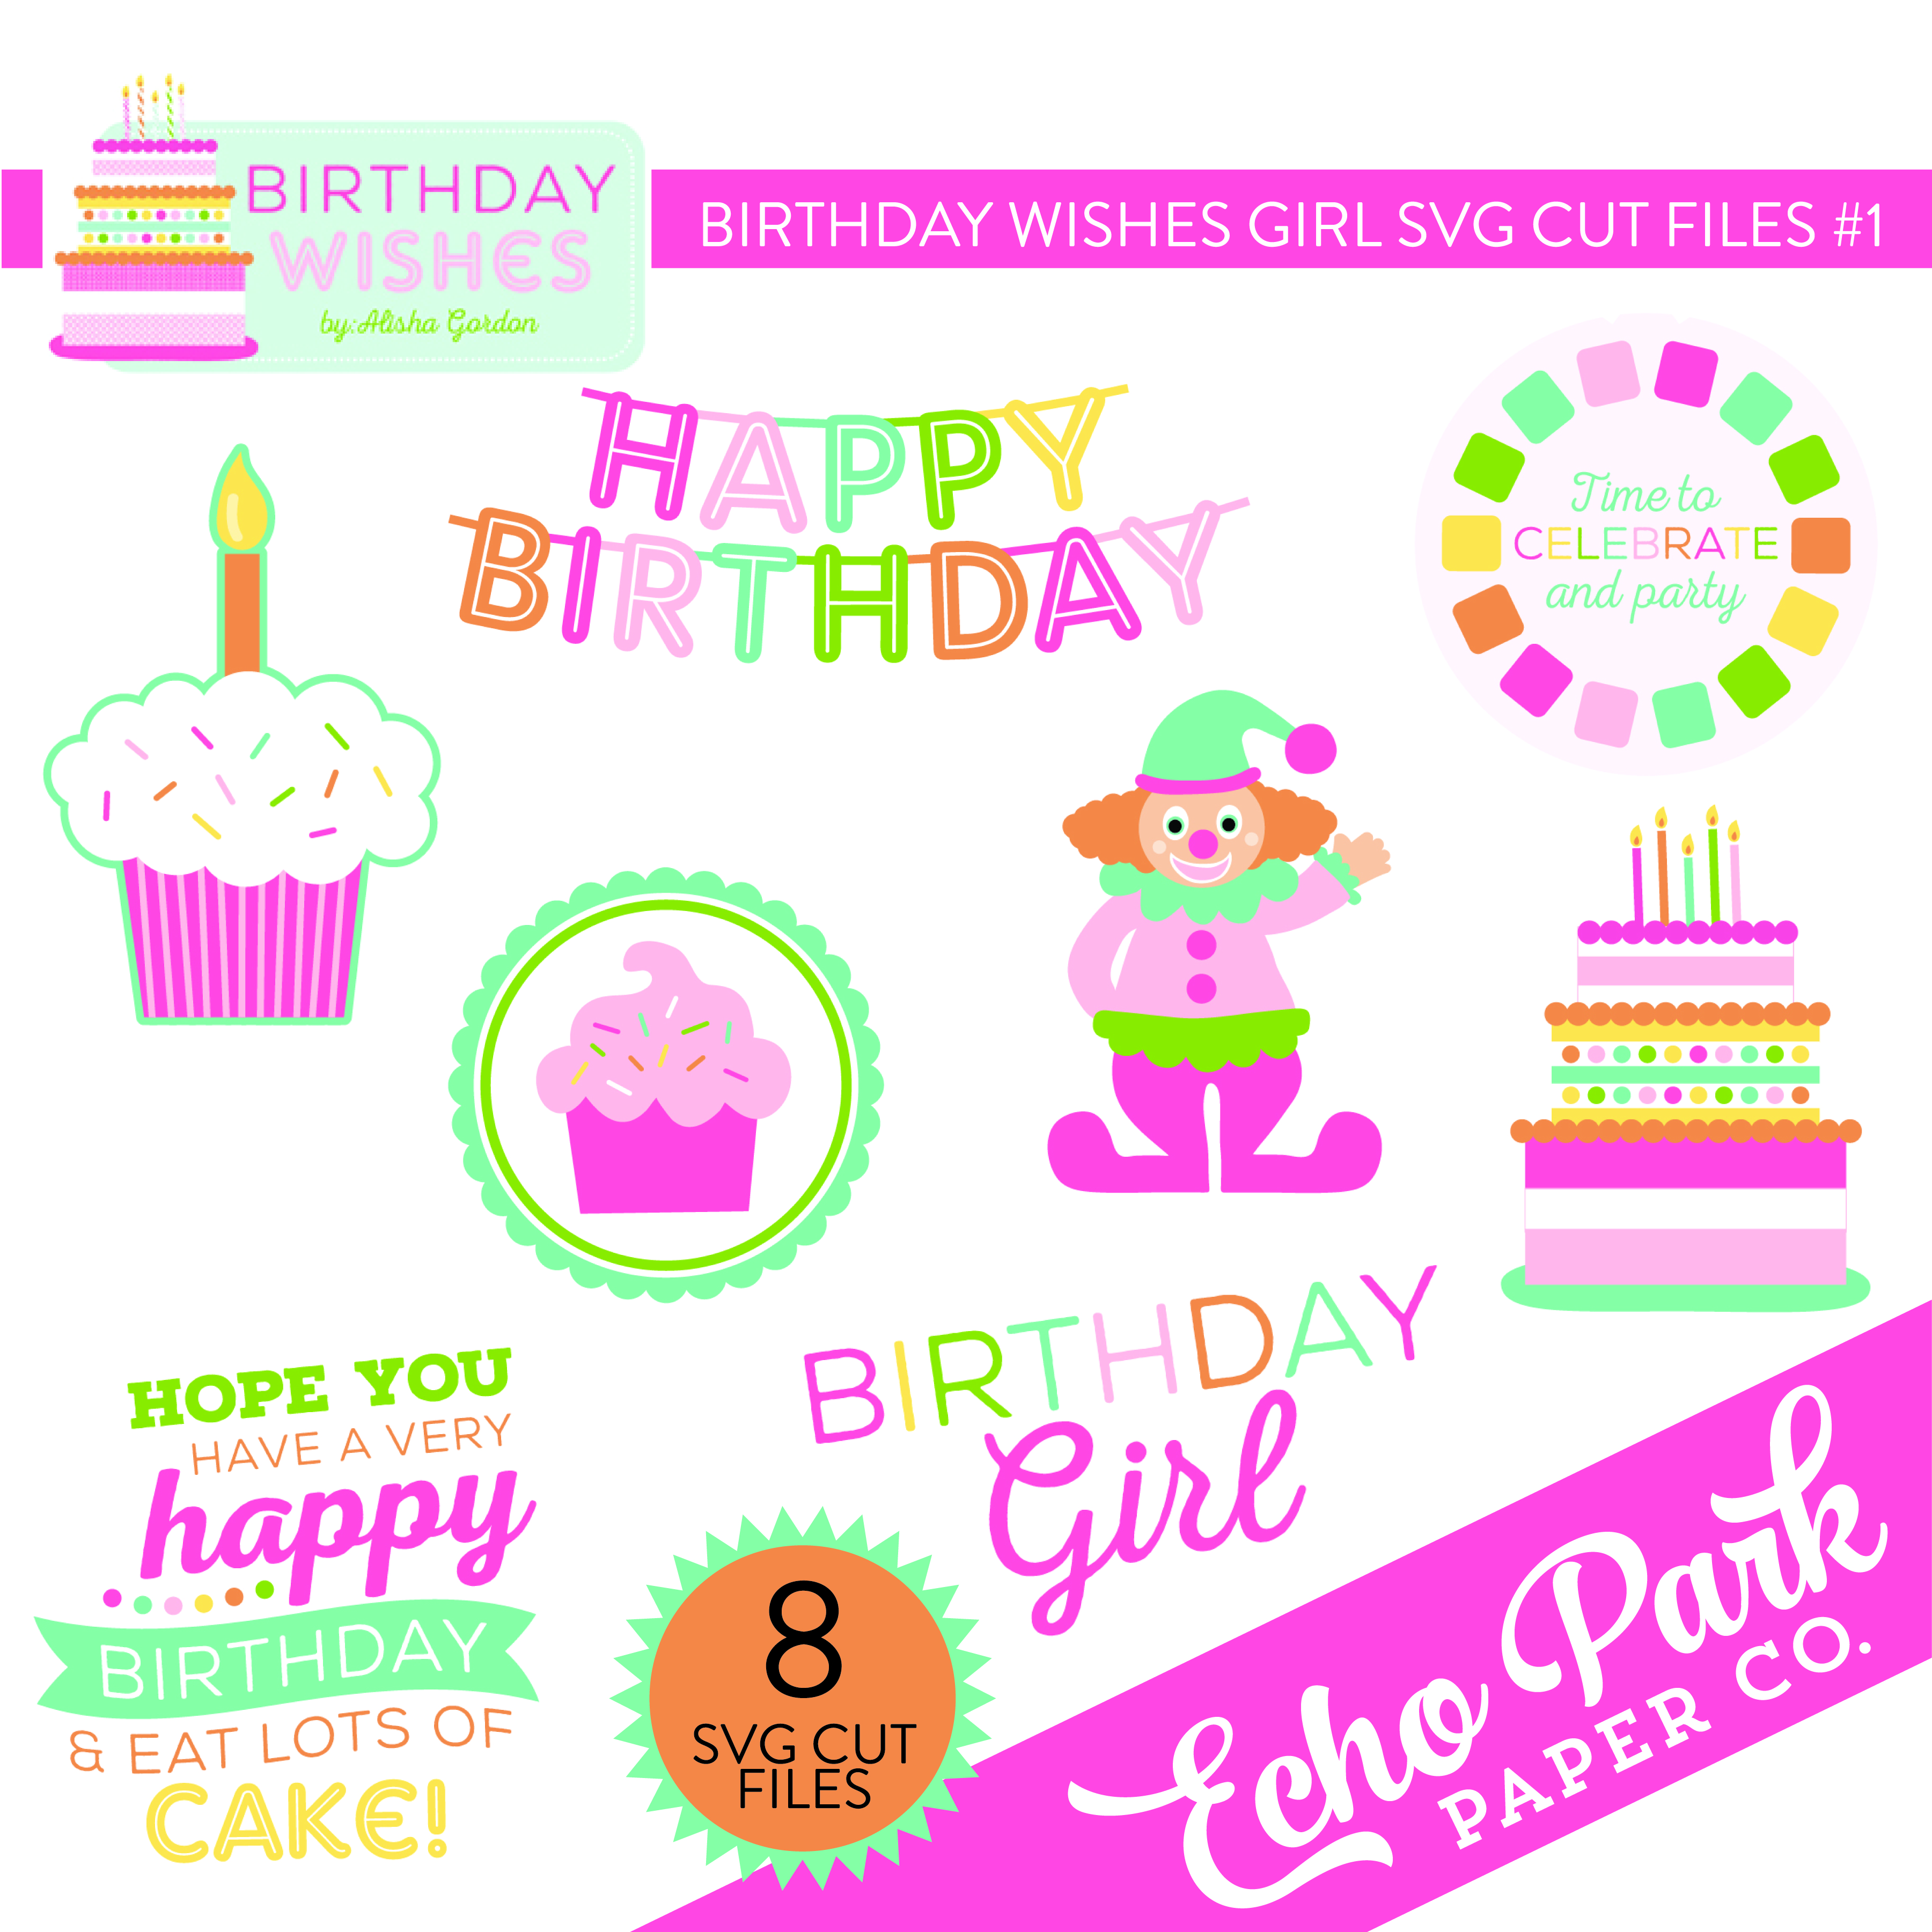 Birthday Wishes Girl SVG Cut File #1